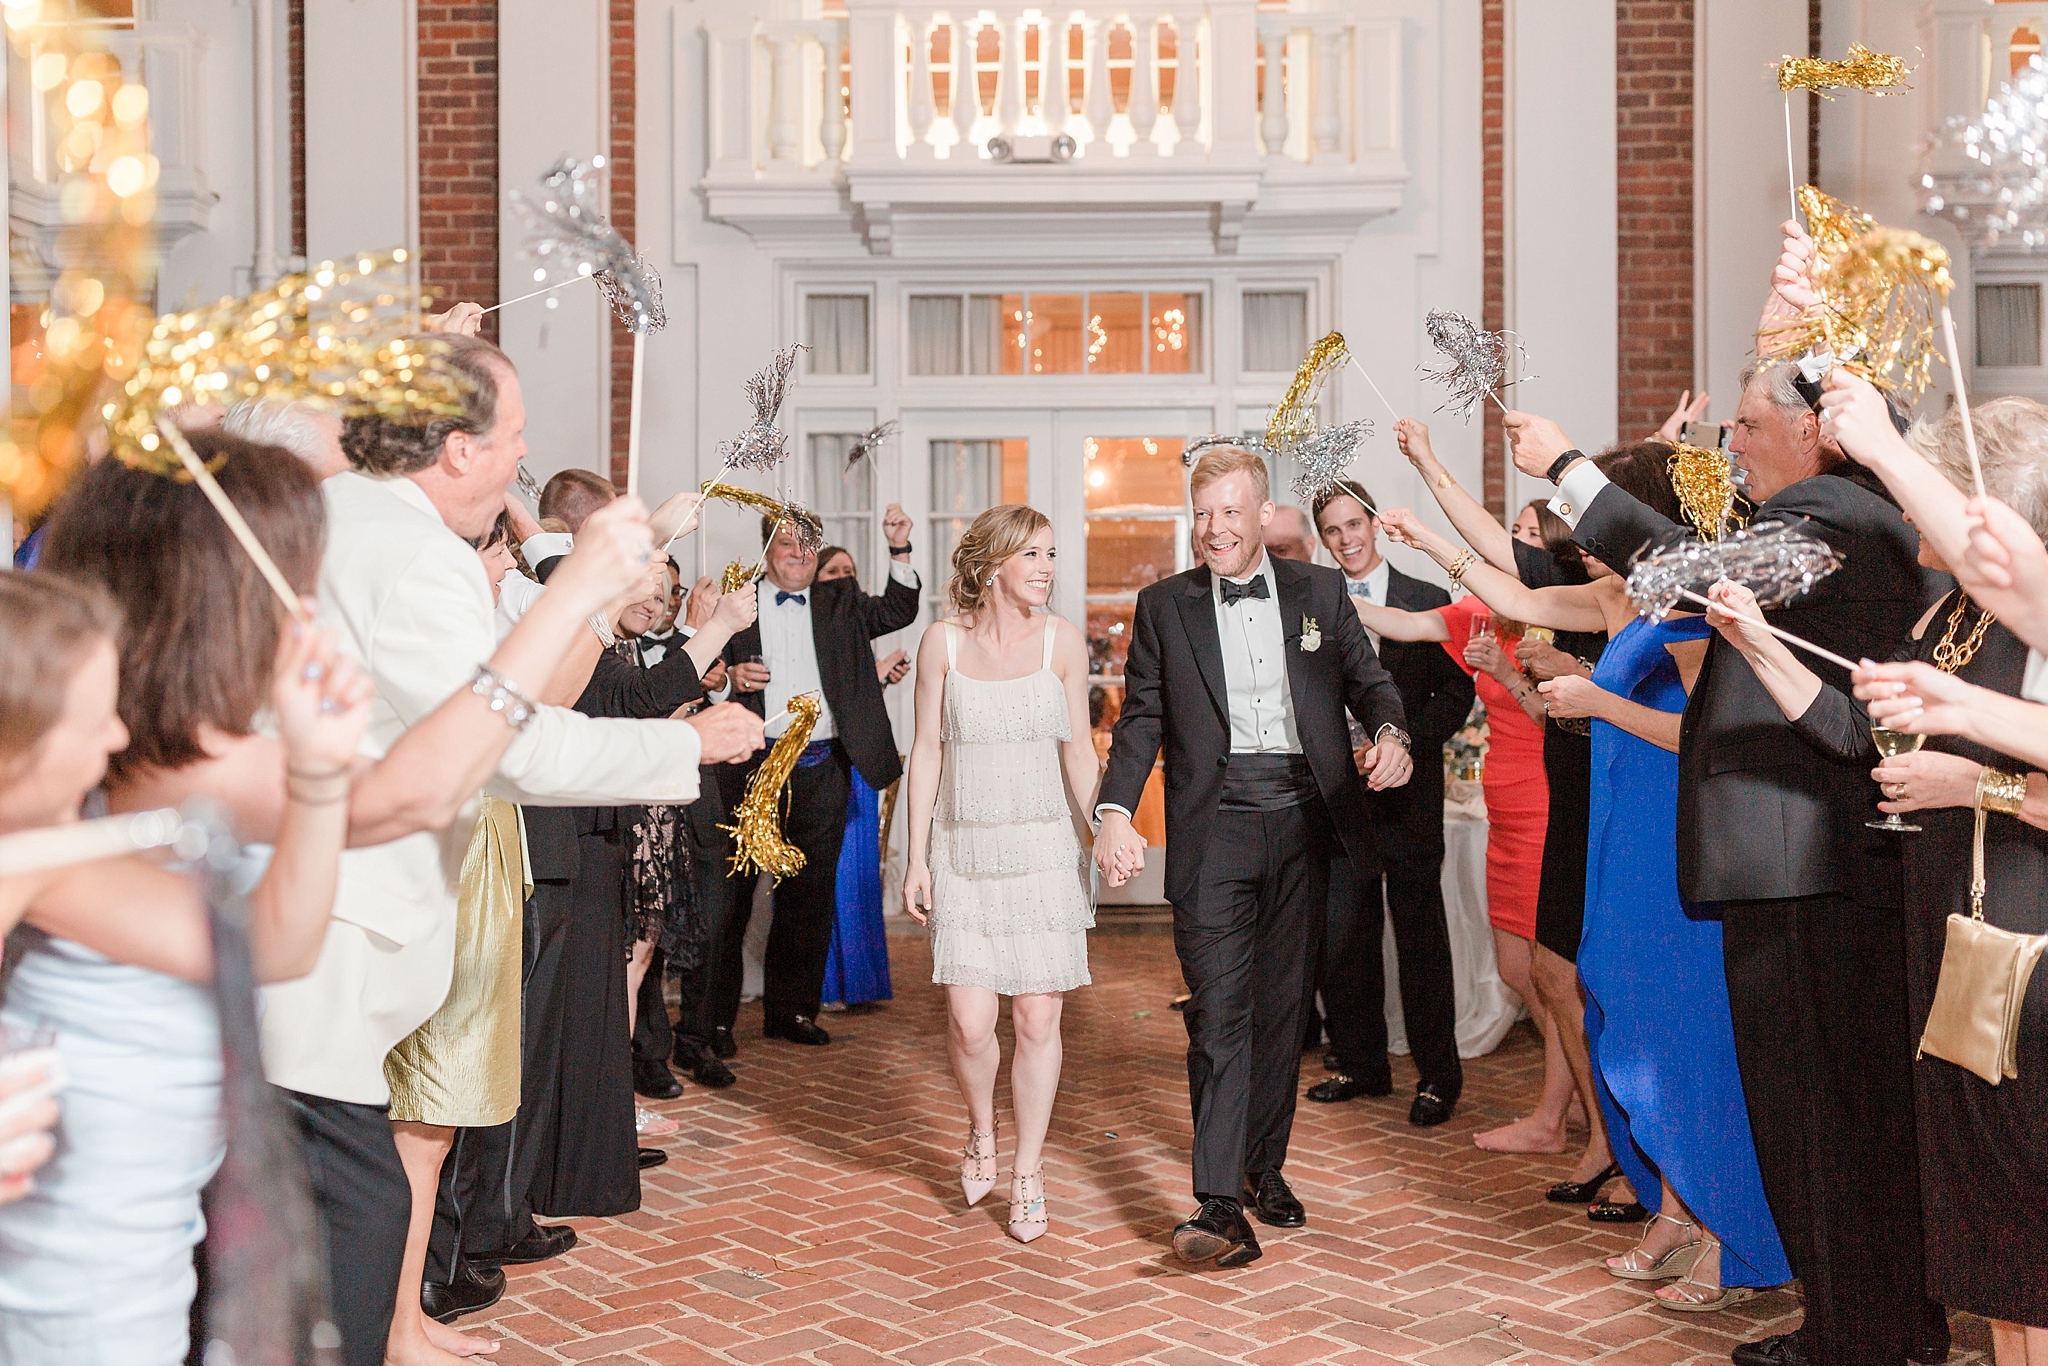 Sharing Part 2 of this incredible ballet inspired black tie wedding at the Country Club of Virginia in Richmond, VA.